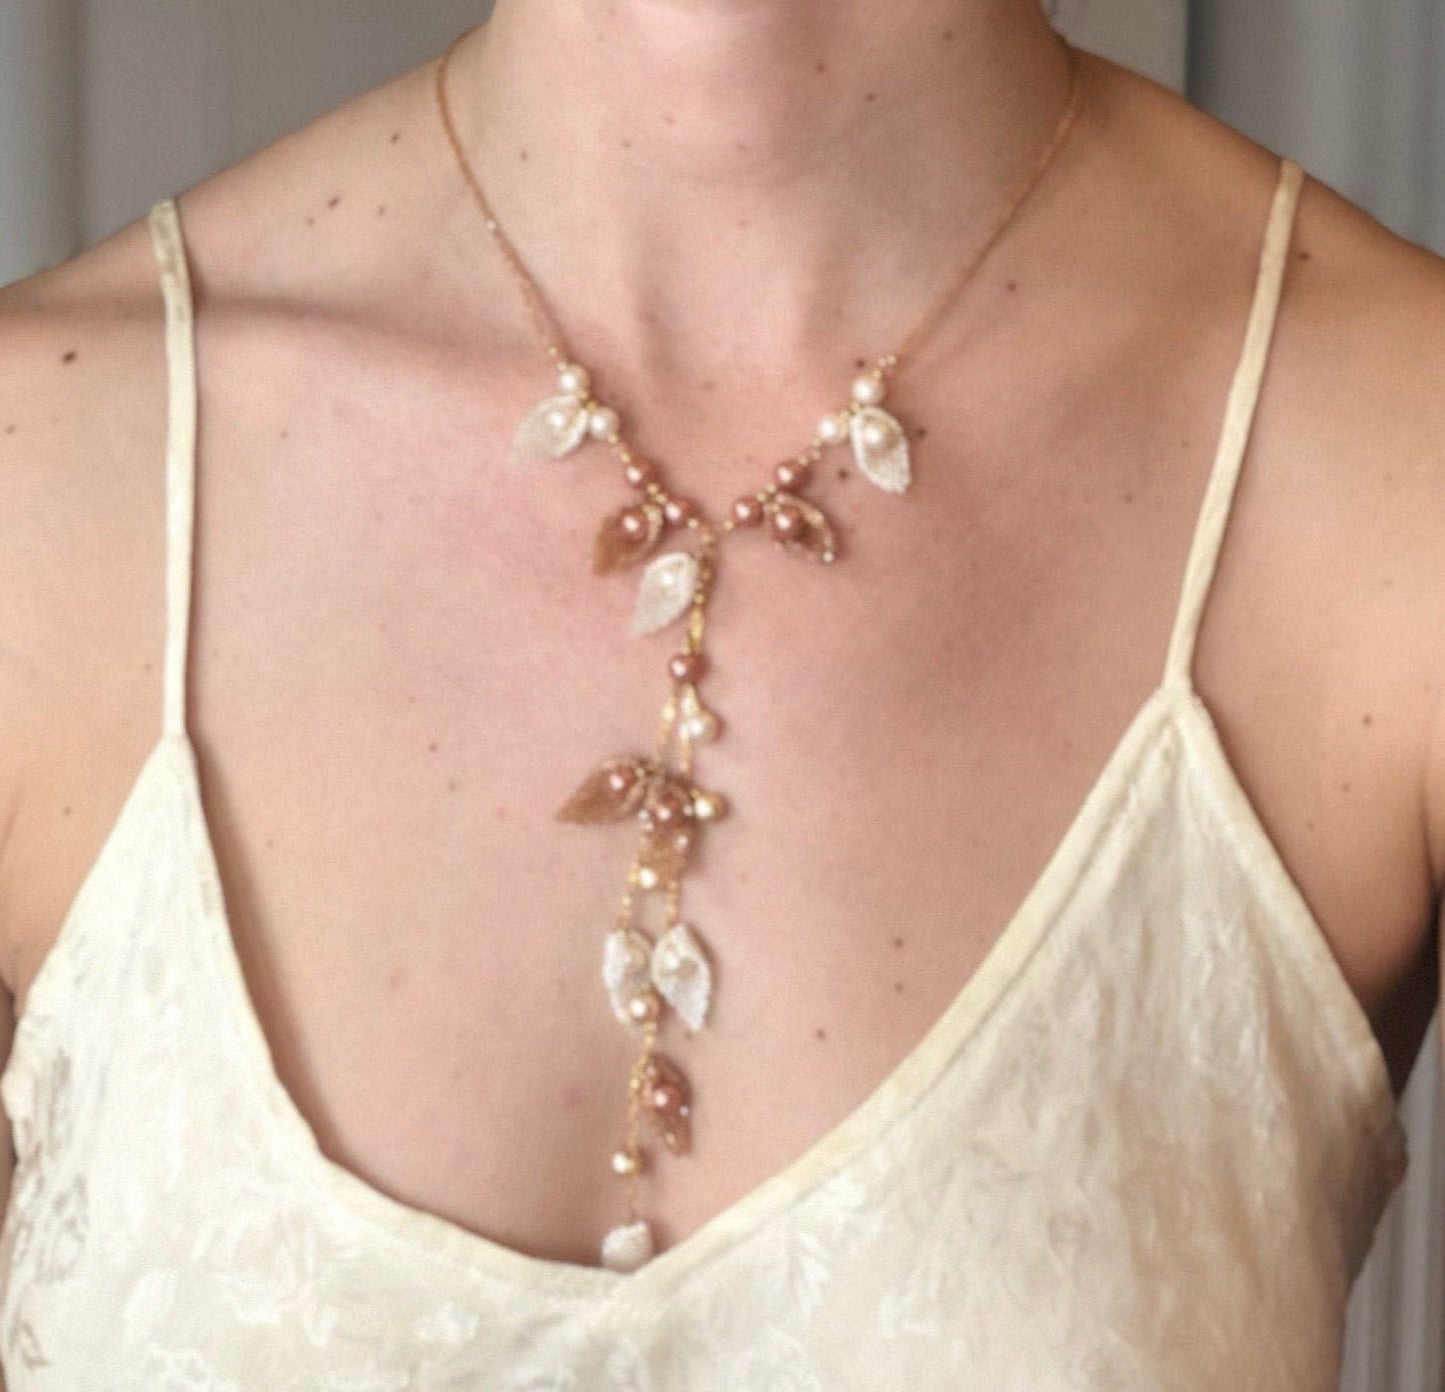 Necklace, handmade, handwoven leaves with set-in pearls makes for a flowing garden necklace.